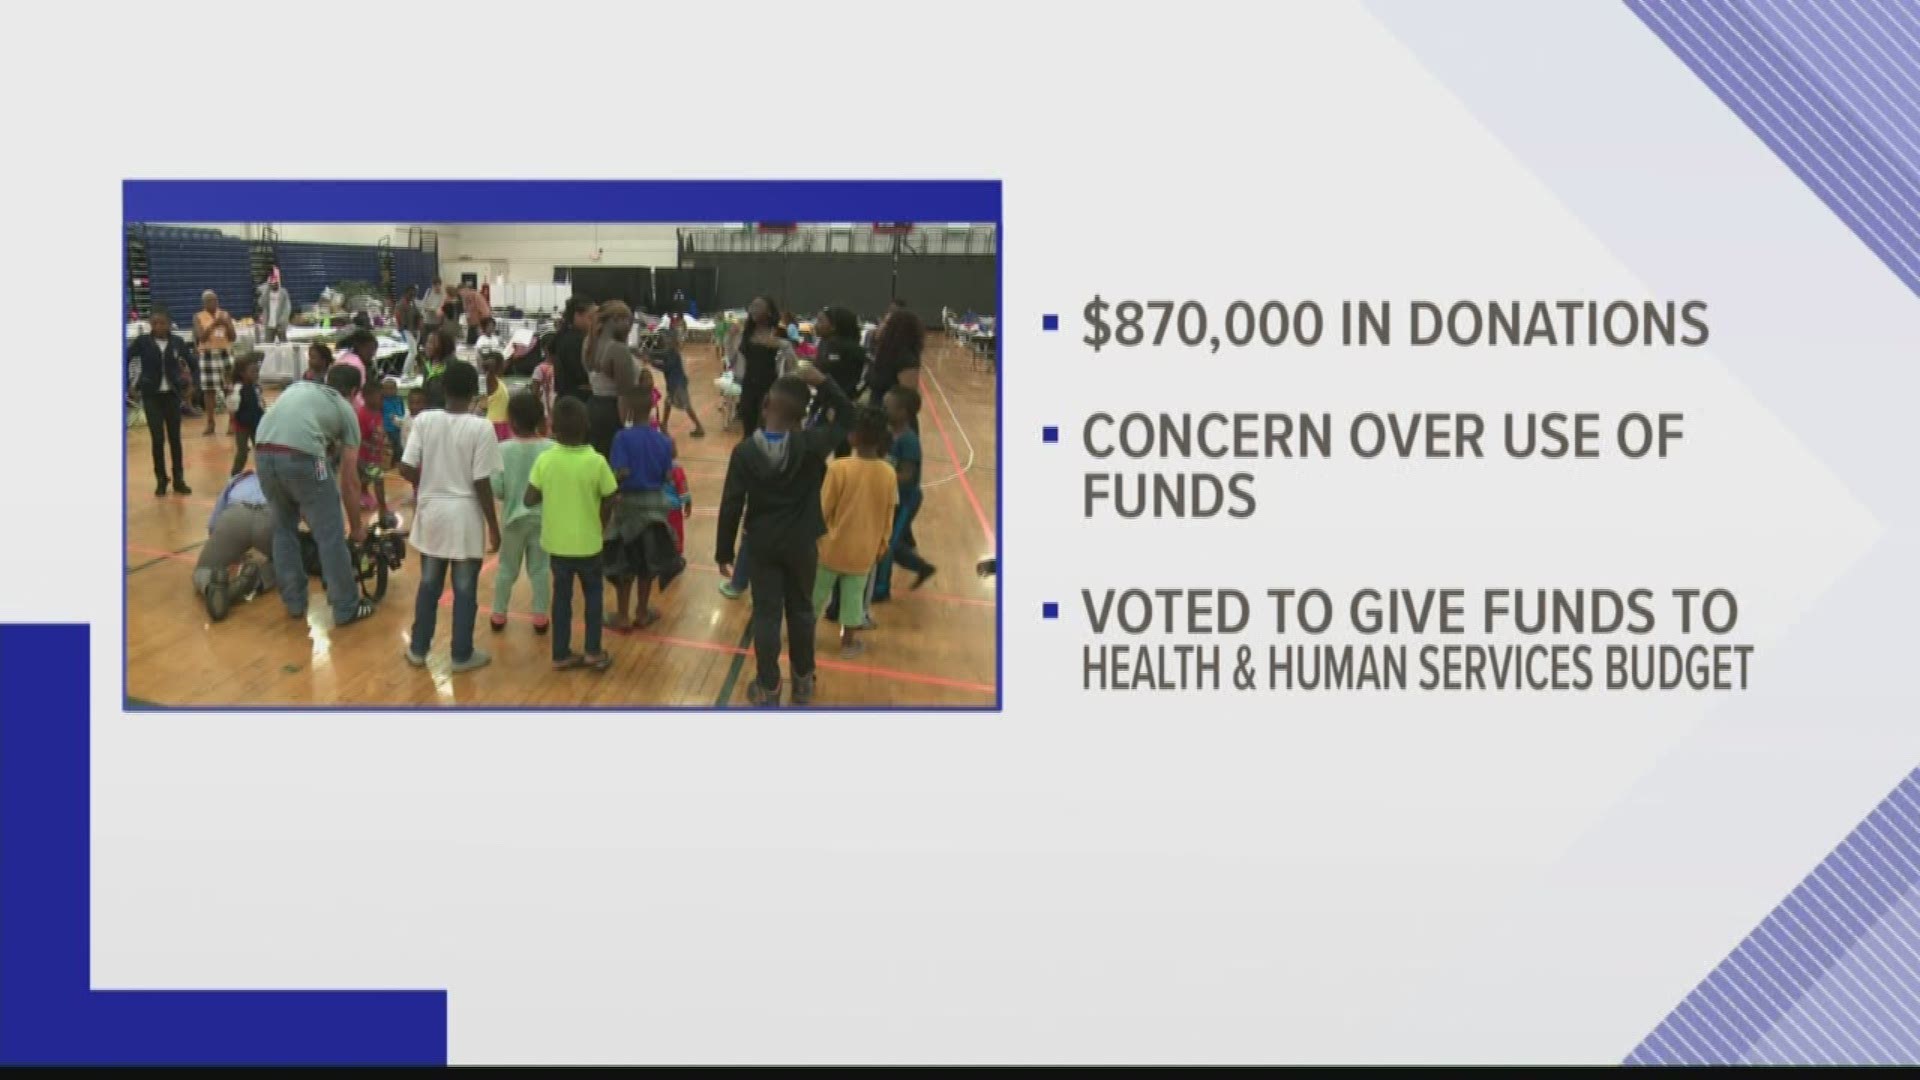 City councilors voted unanimously to move all of the donations to Portland's Health and Human Services budget. More details on how much and where the money will go is still being determined.